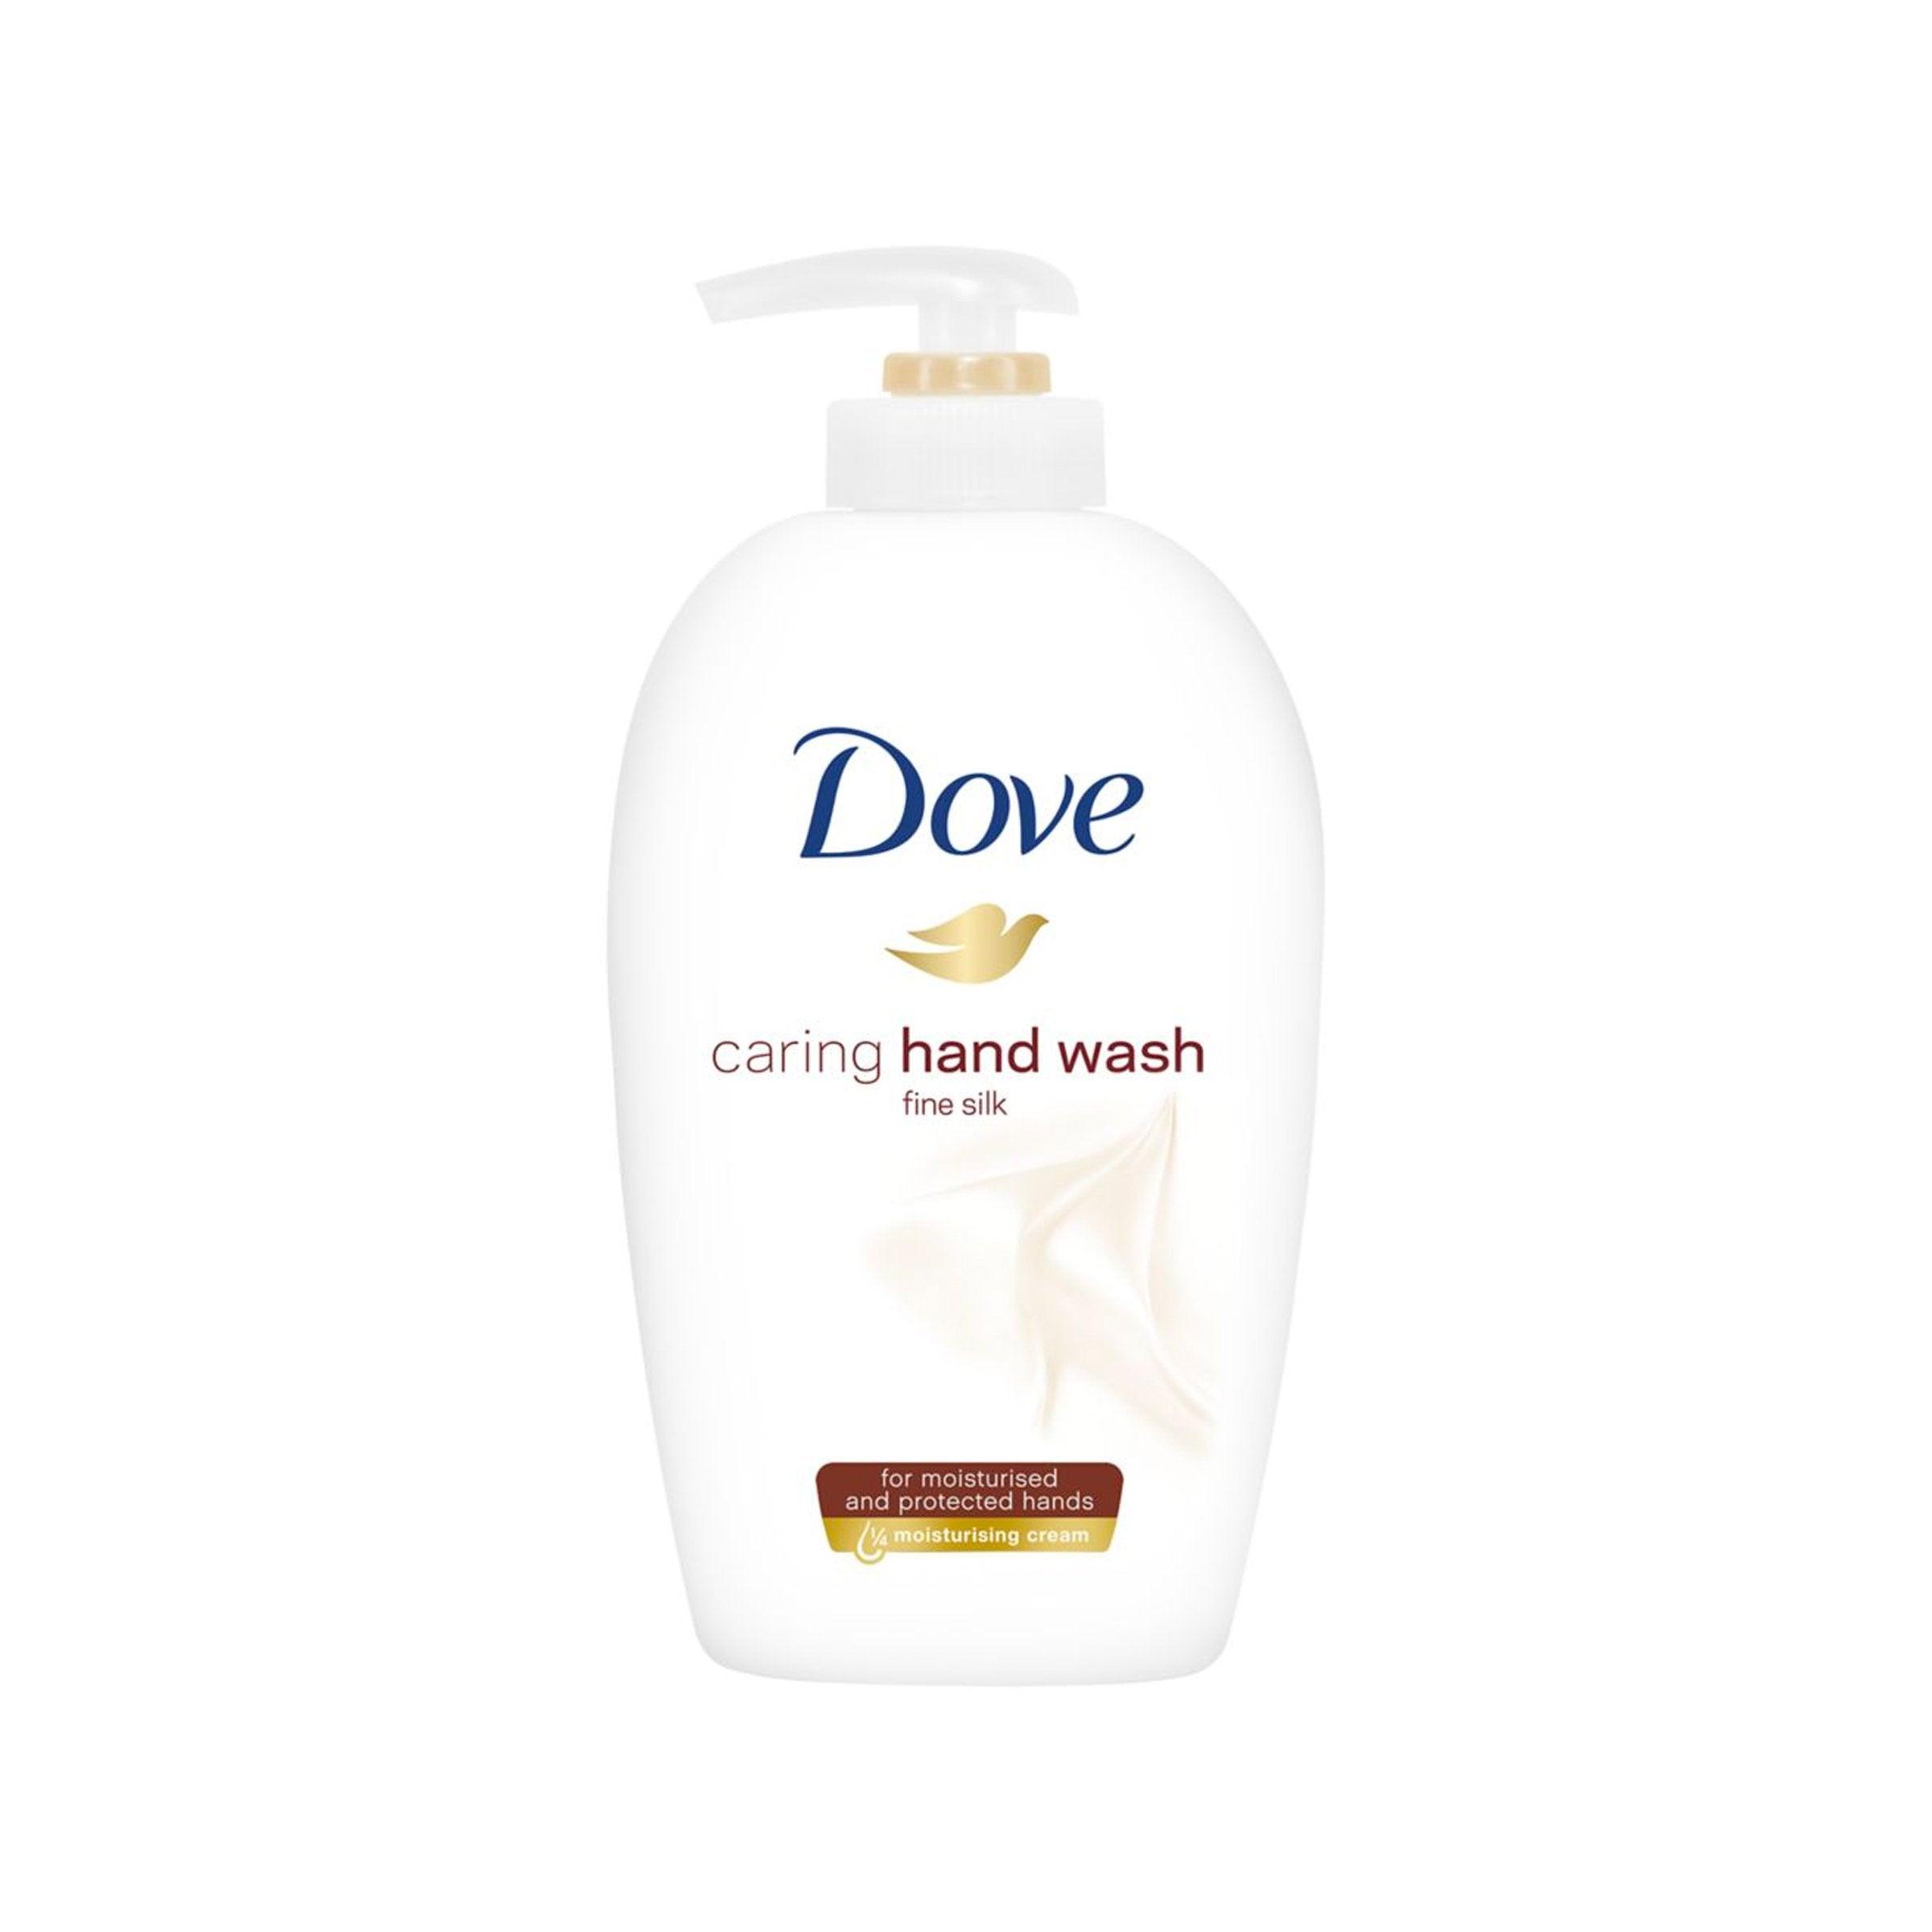 Dove Caring Hand Wash - Silk - 250ml - Vending Superstore